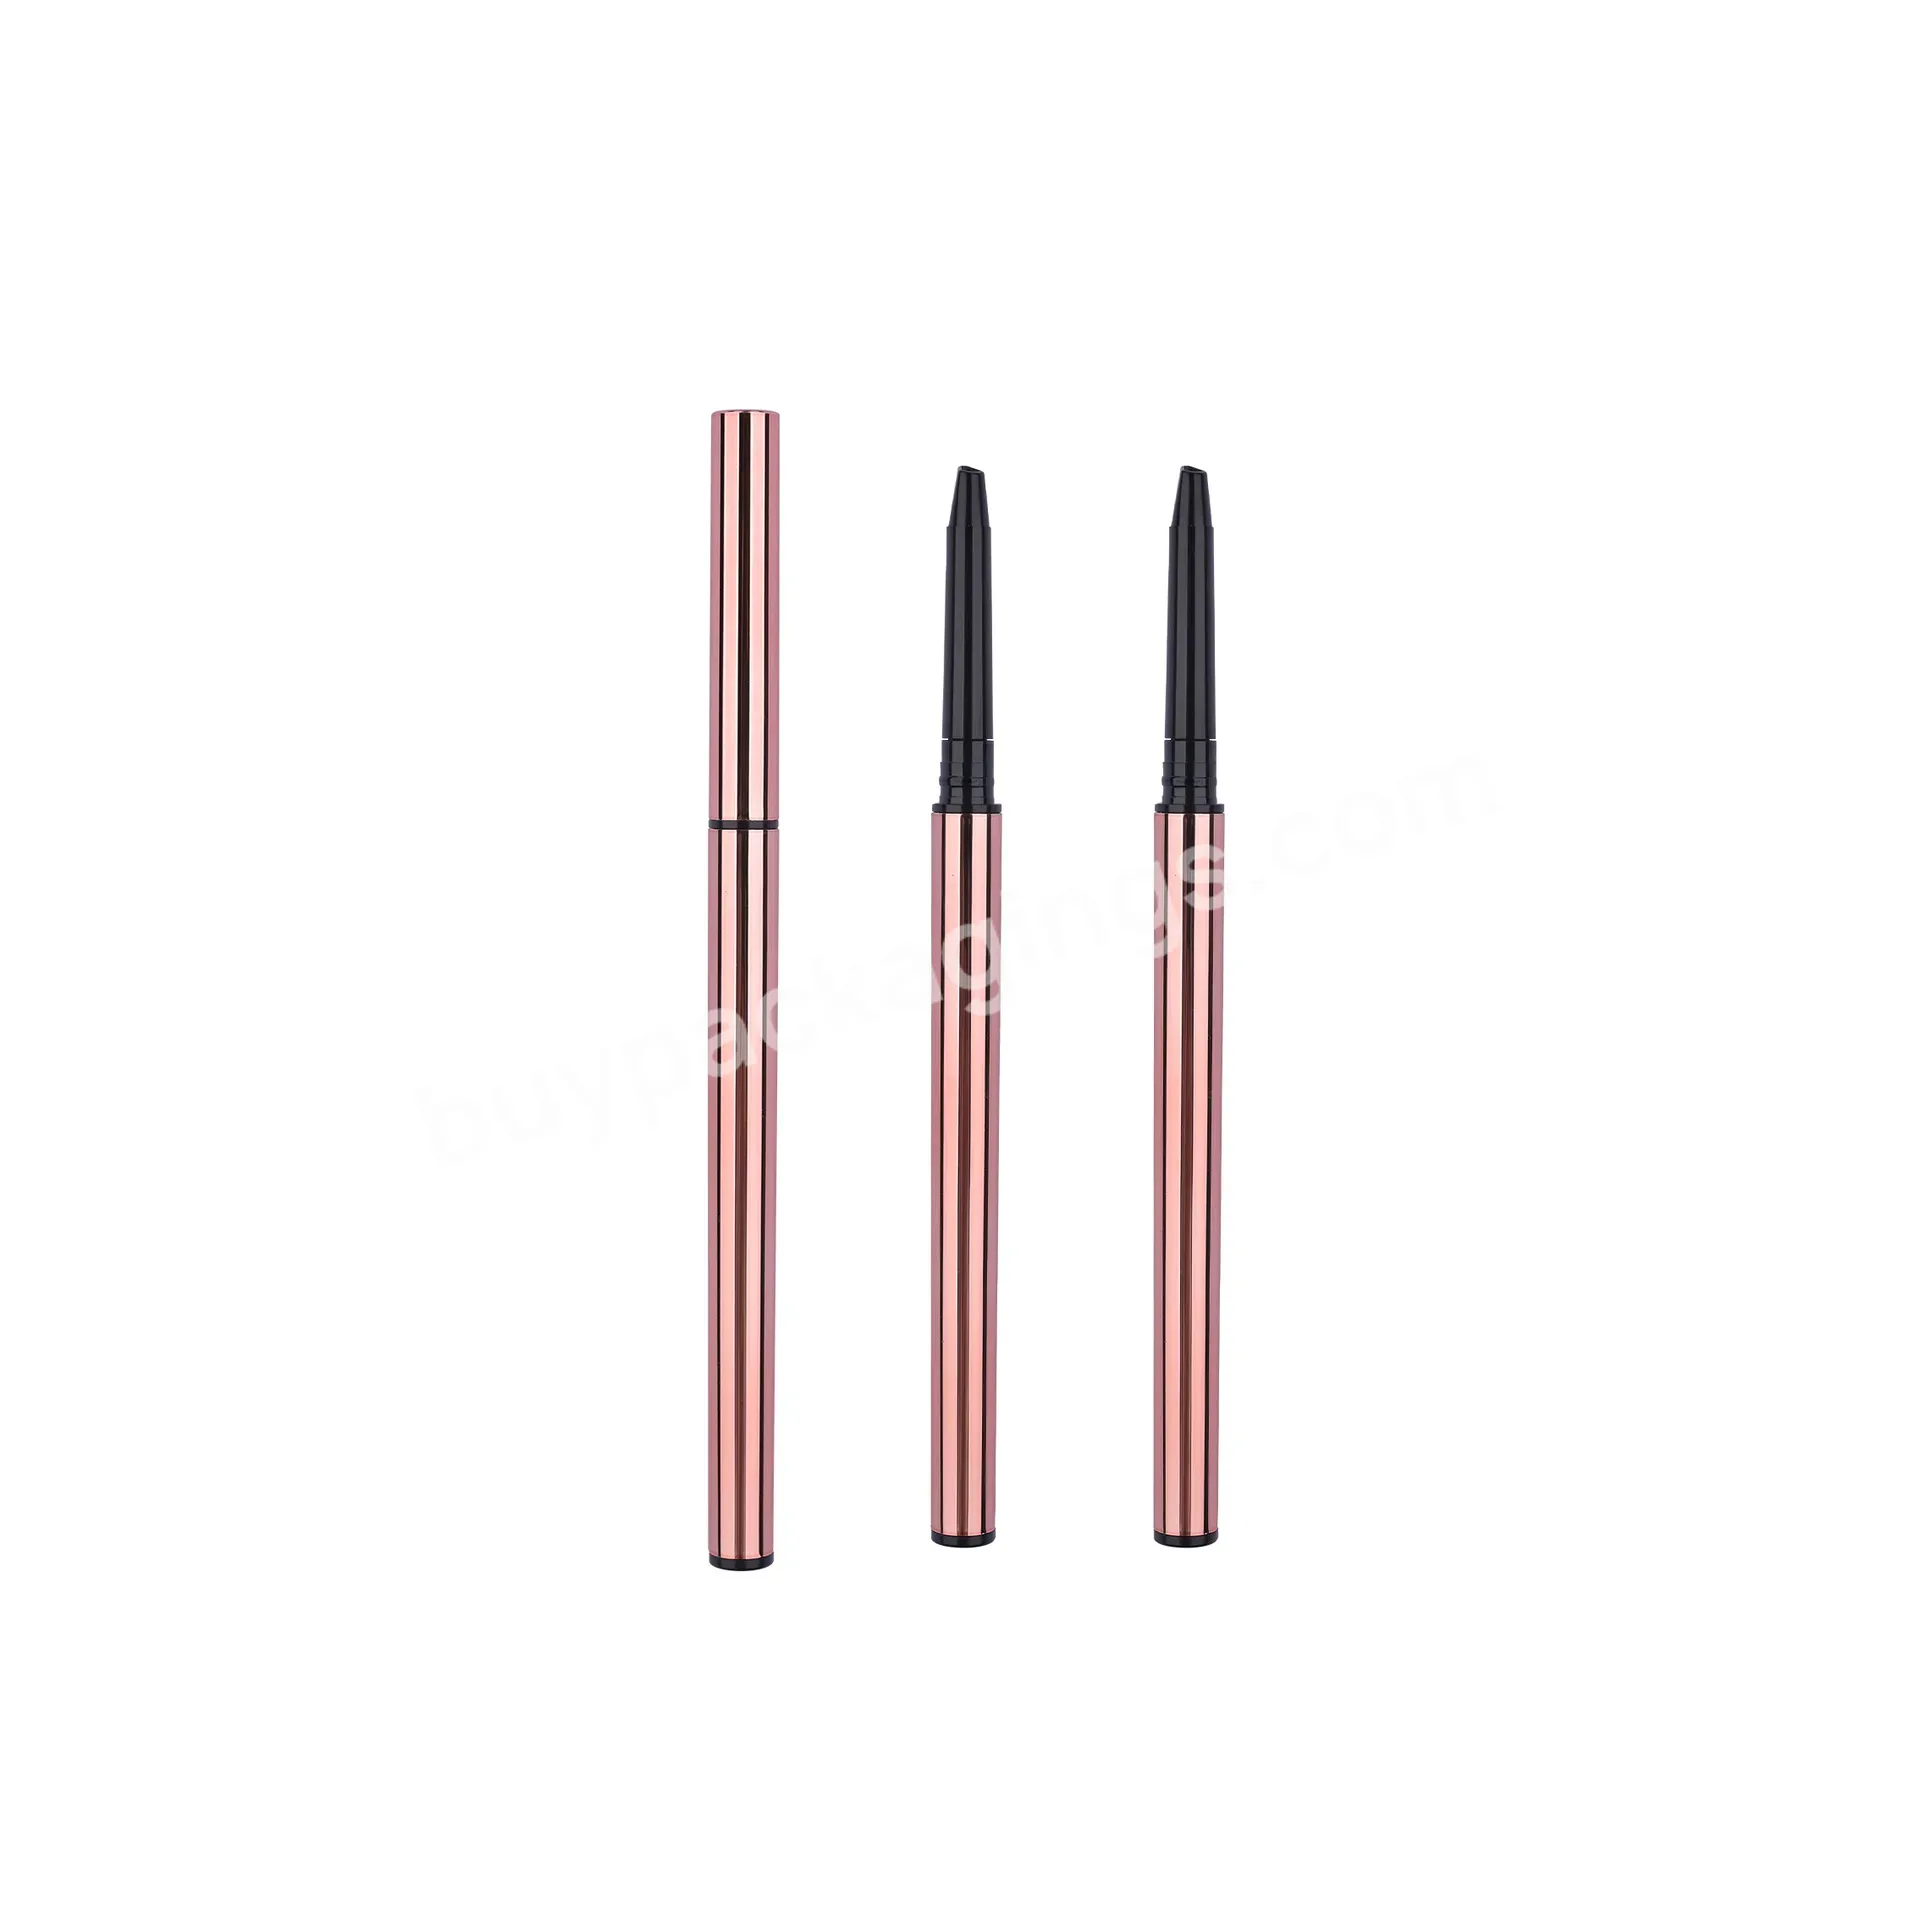 Private Label Customize Yh-m39 1.5mm Eyebrow Pencil Plastic Packaging Empty Container Pen Tube - Buy Eyebrow Pencil Tube,Eyebrow Pencil Plastic Packaging,Eyebrow Pencil Empty Container.